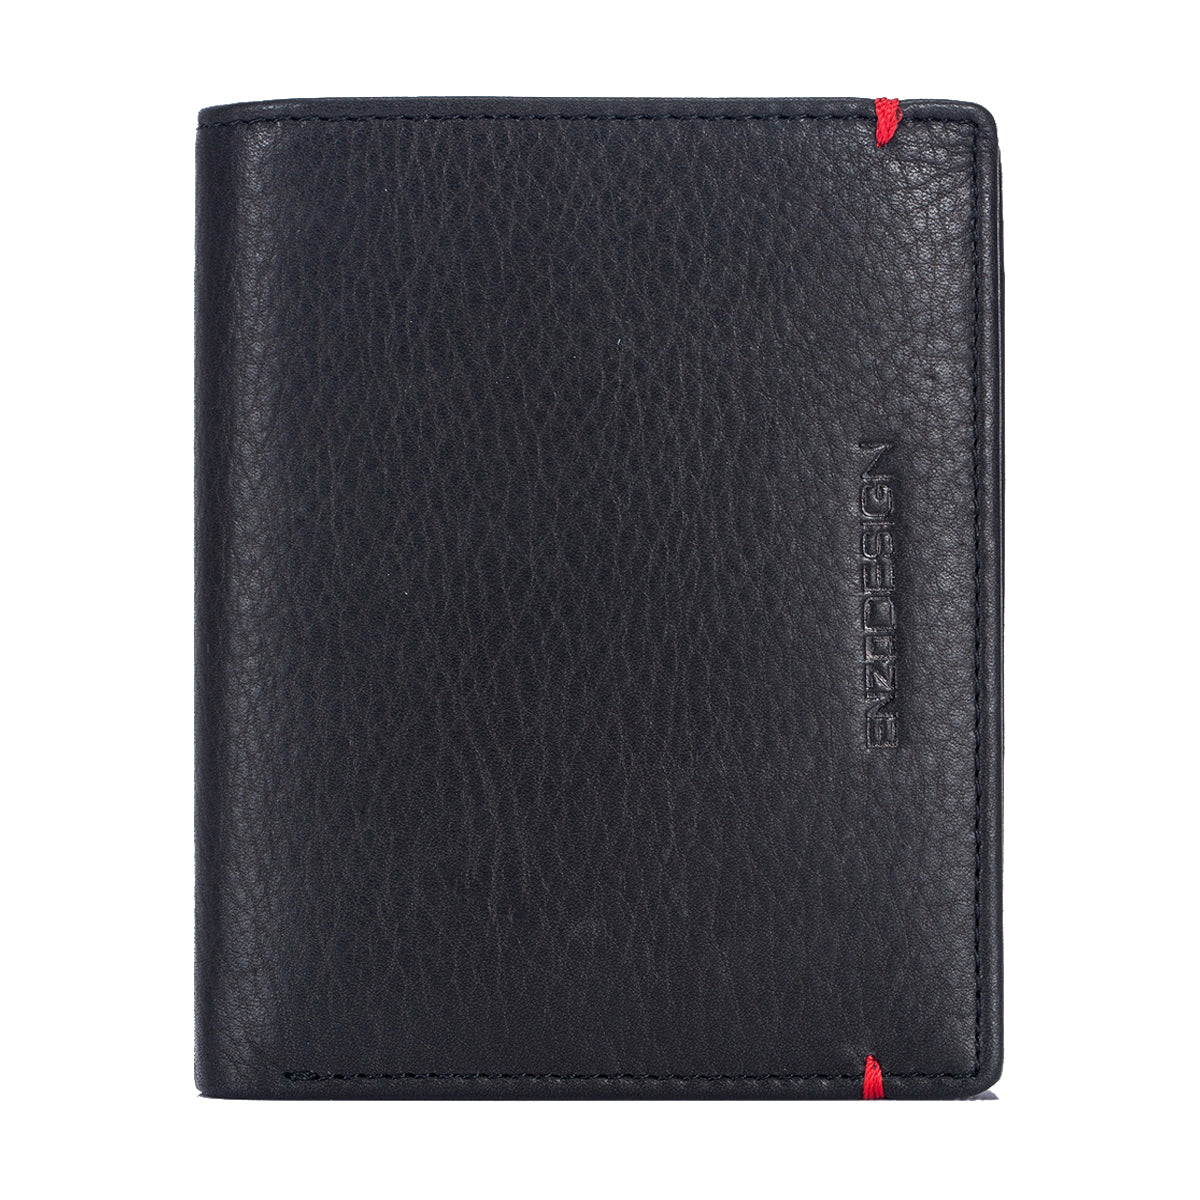 EnzoDesign Cowhide Leather Wallet 